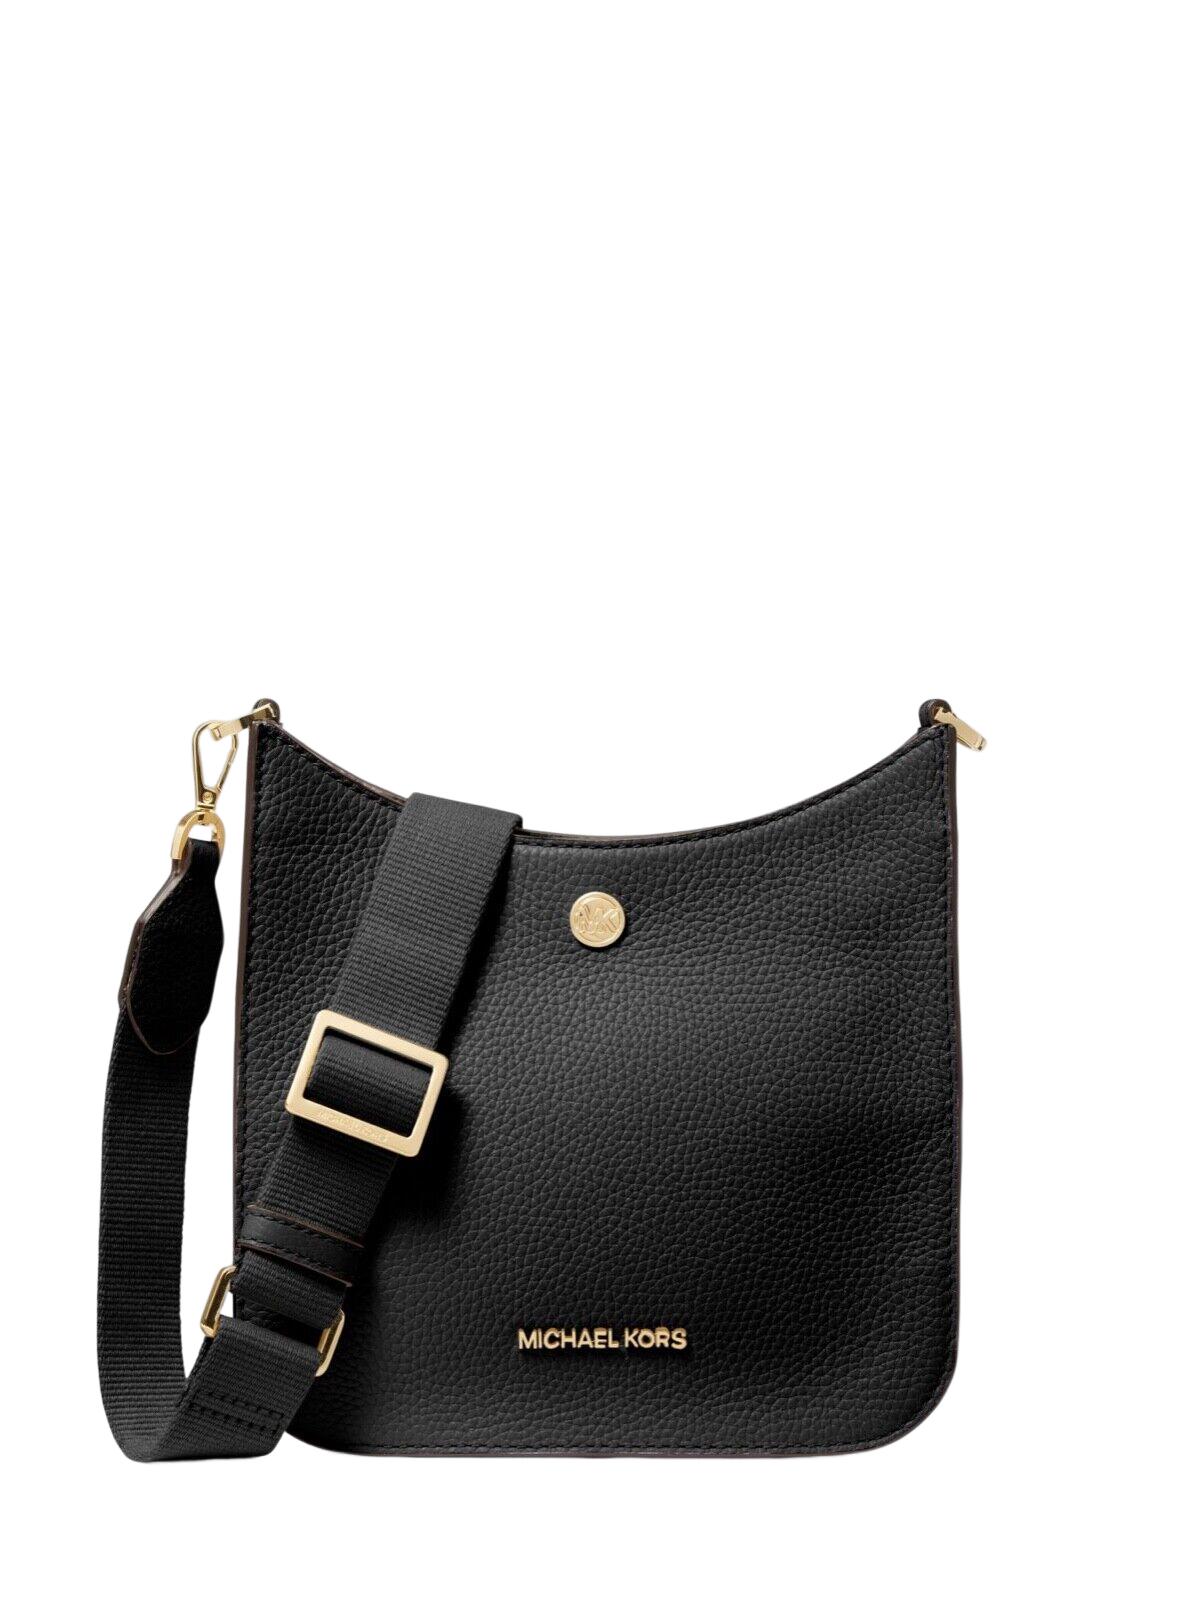 Michael Kors Briley Small Pebbled Leather Messenger Bag in Black